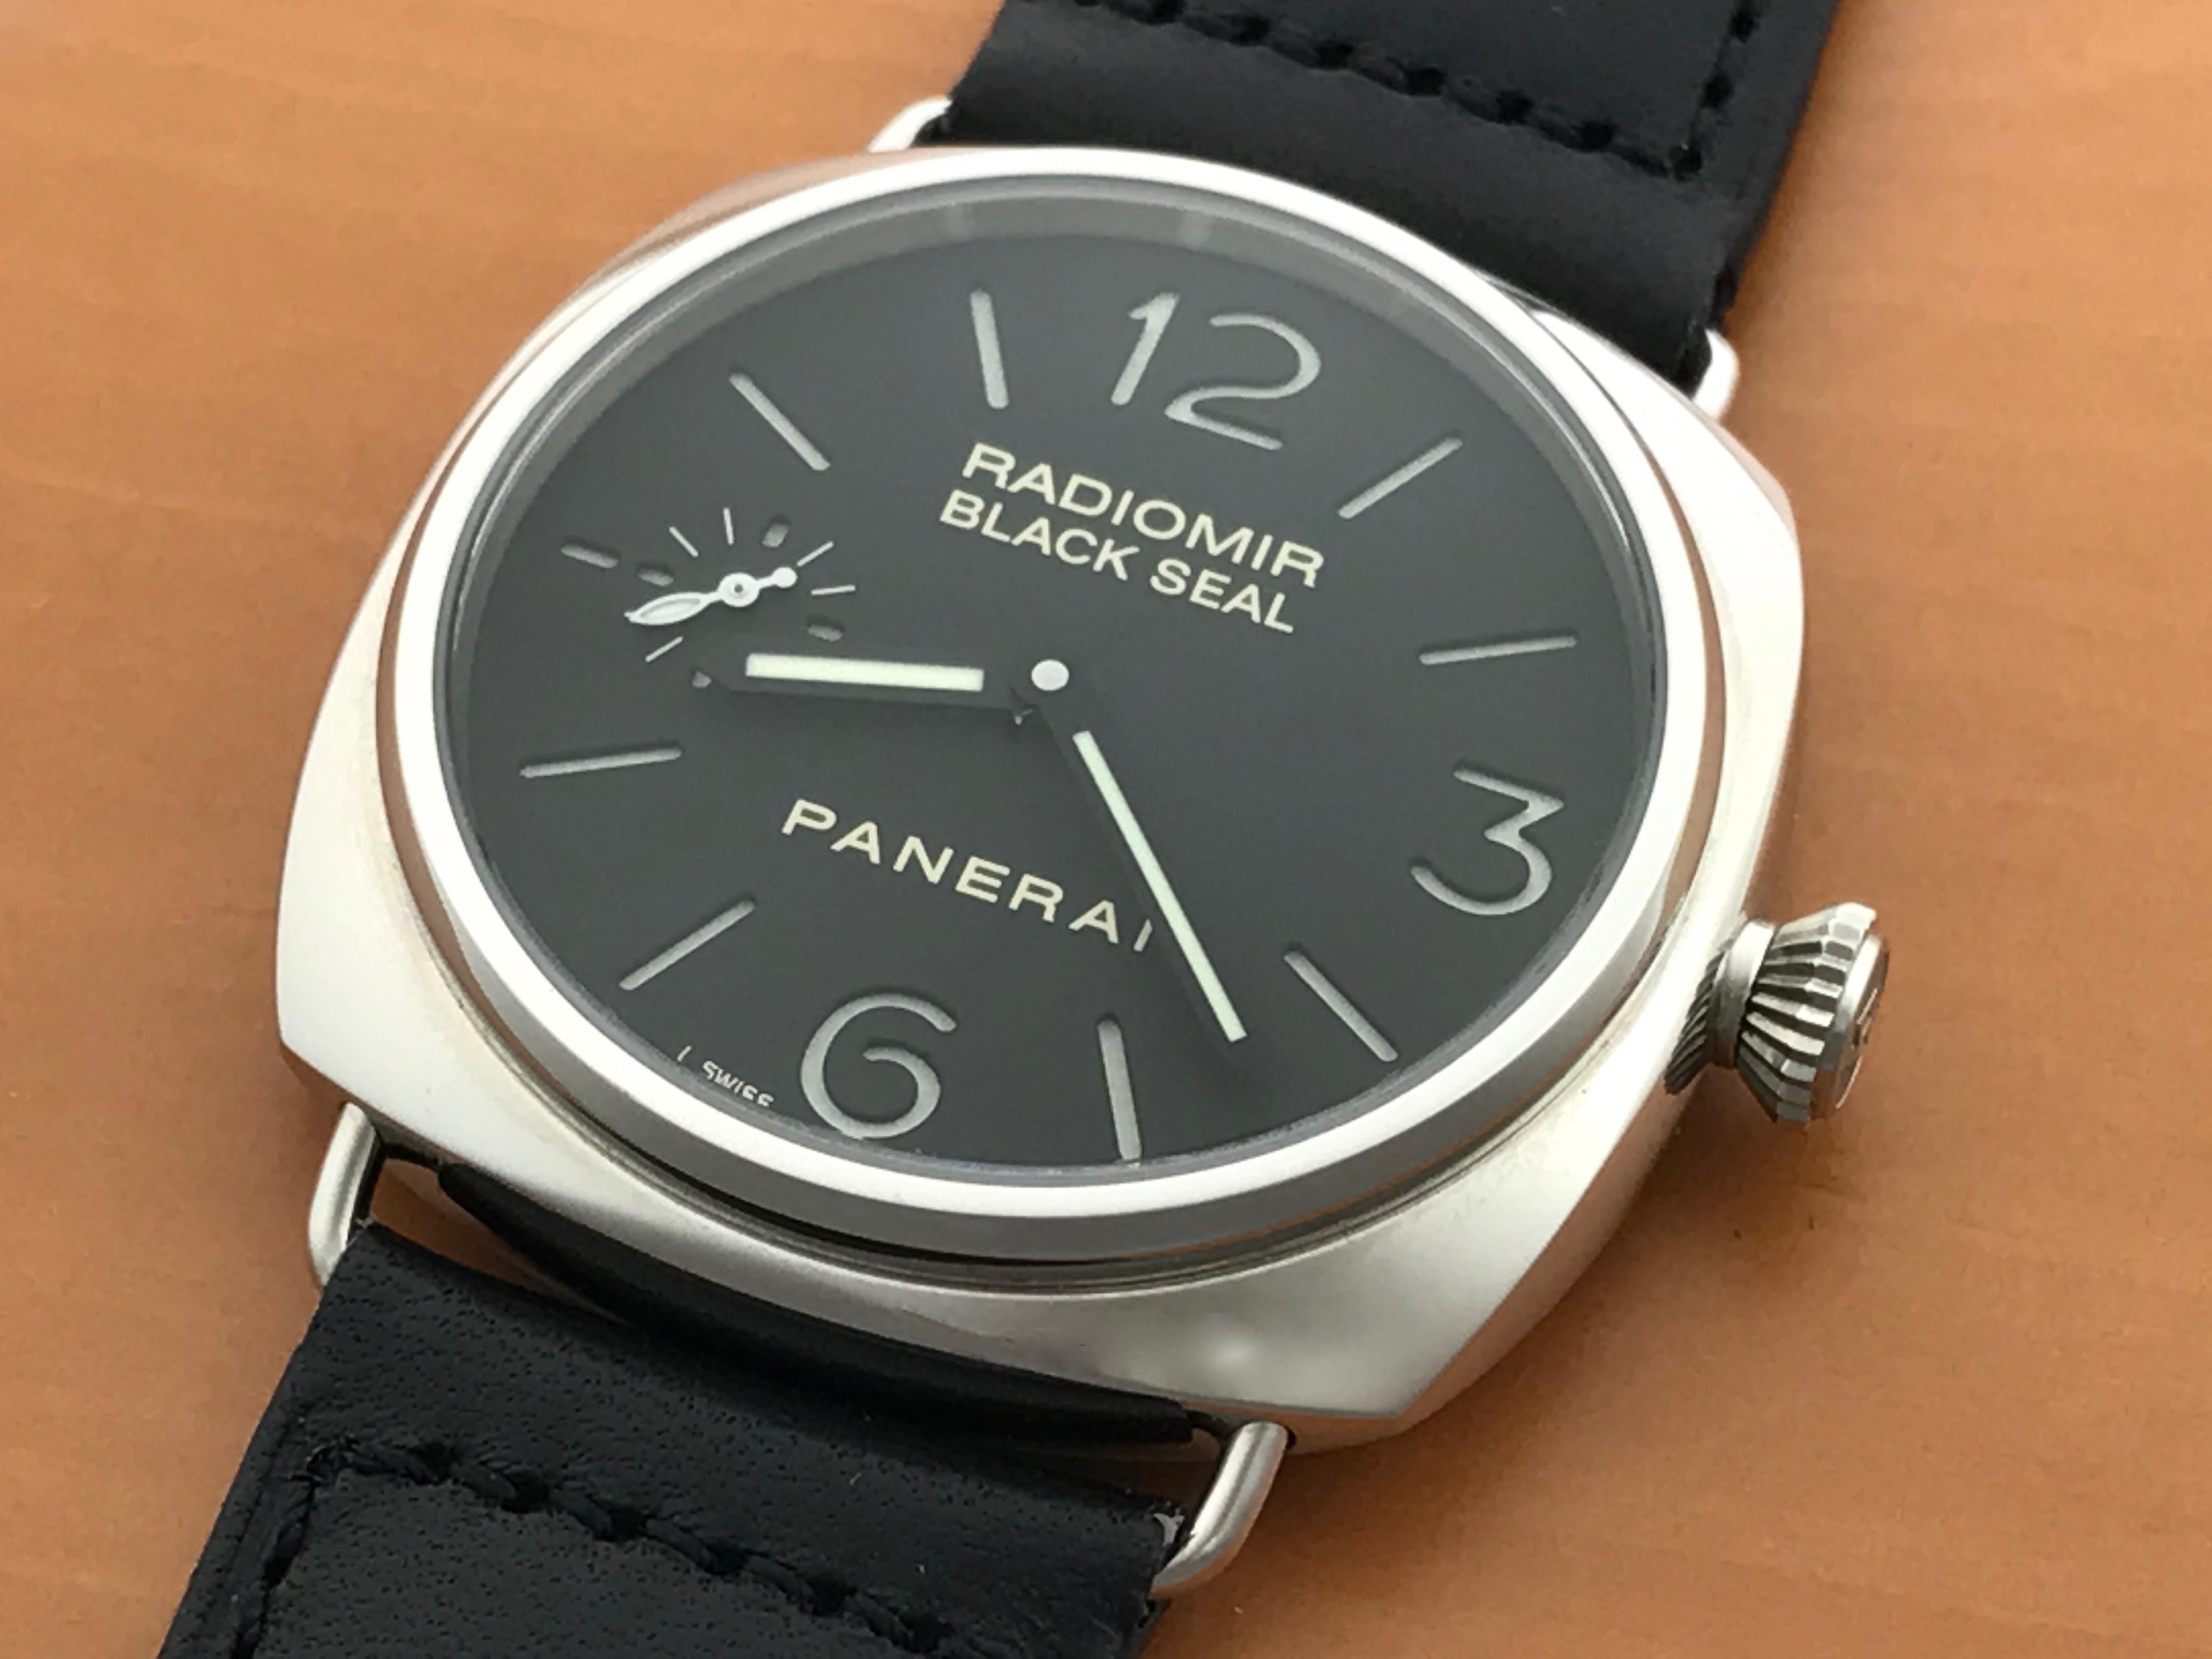 The Panerai Black Seal Radiomir Limited Edition PAM00183 certified pre-owned automatic men's wrist watch. Limited Series of 1500 Individually Numbered Pieces,  Black dial with luminous markers and Arabic numerals, signed Black Seal on dial. Panerai